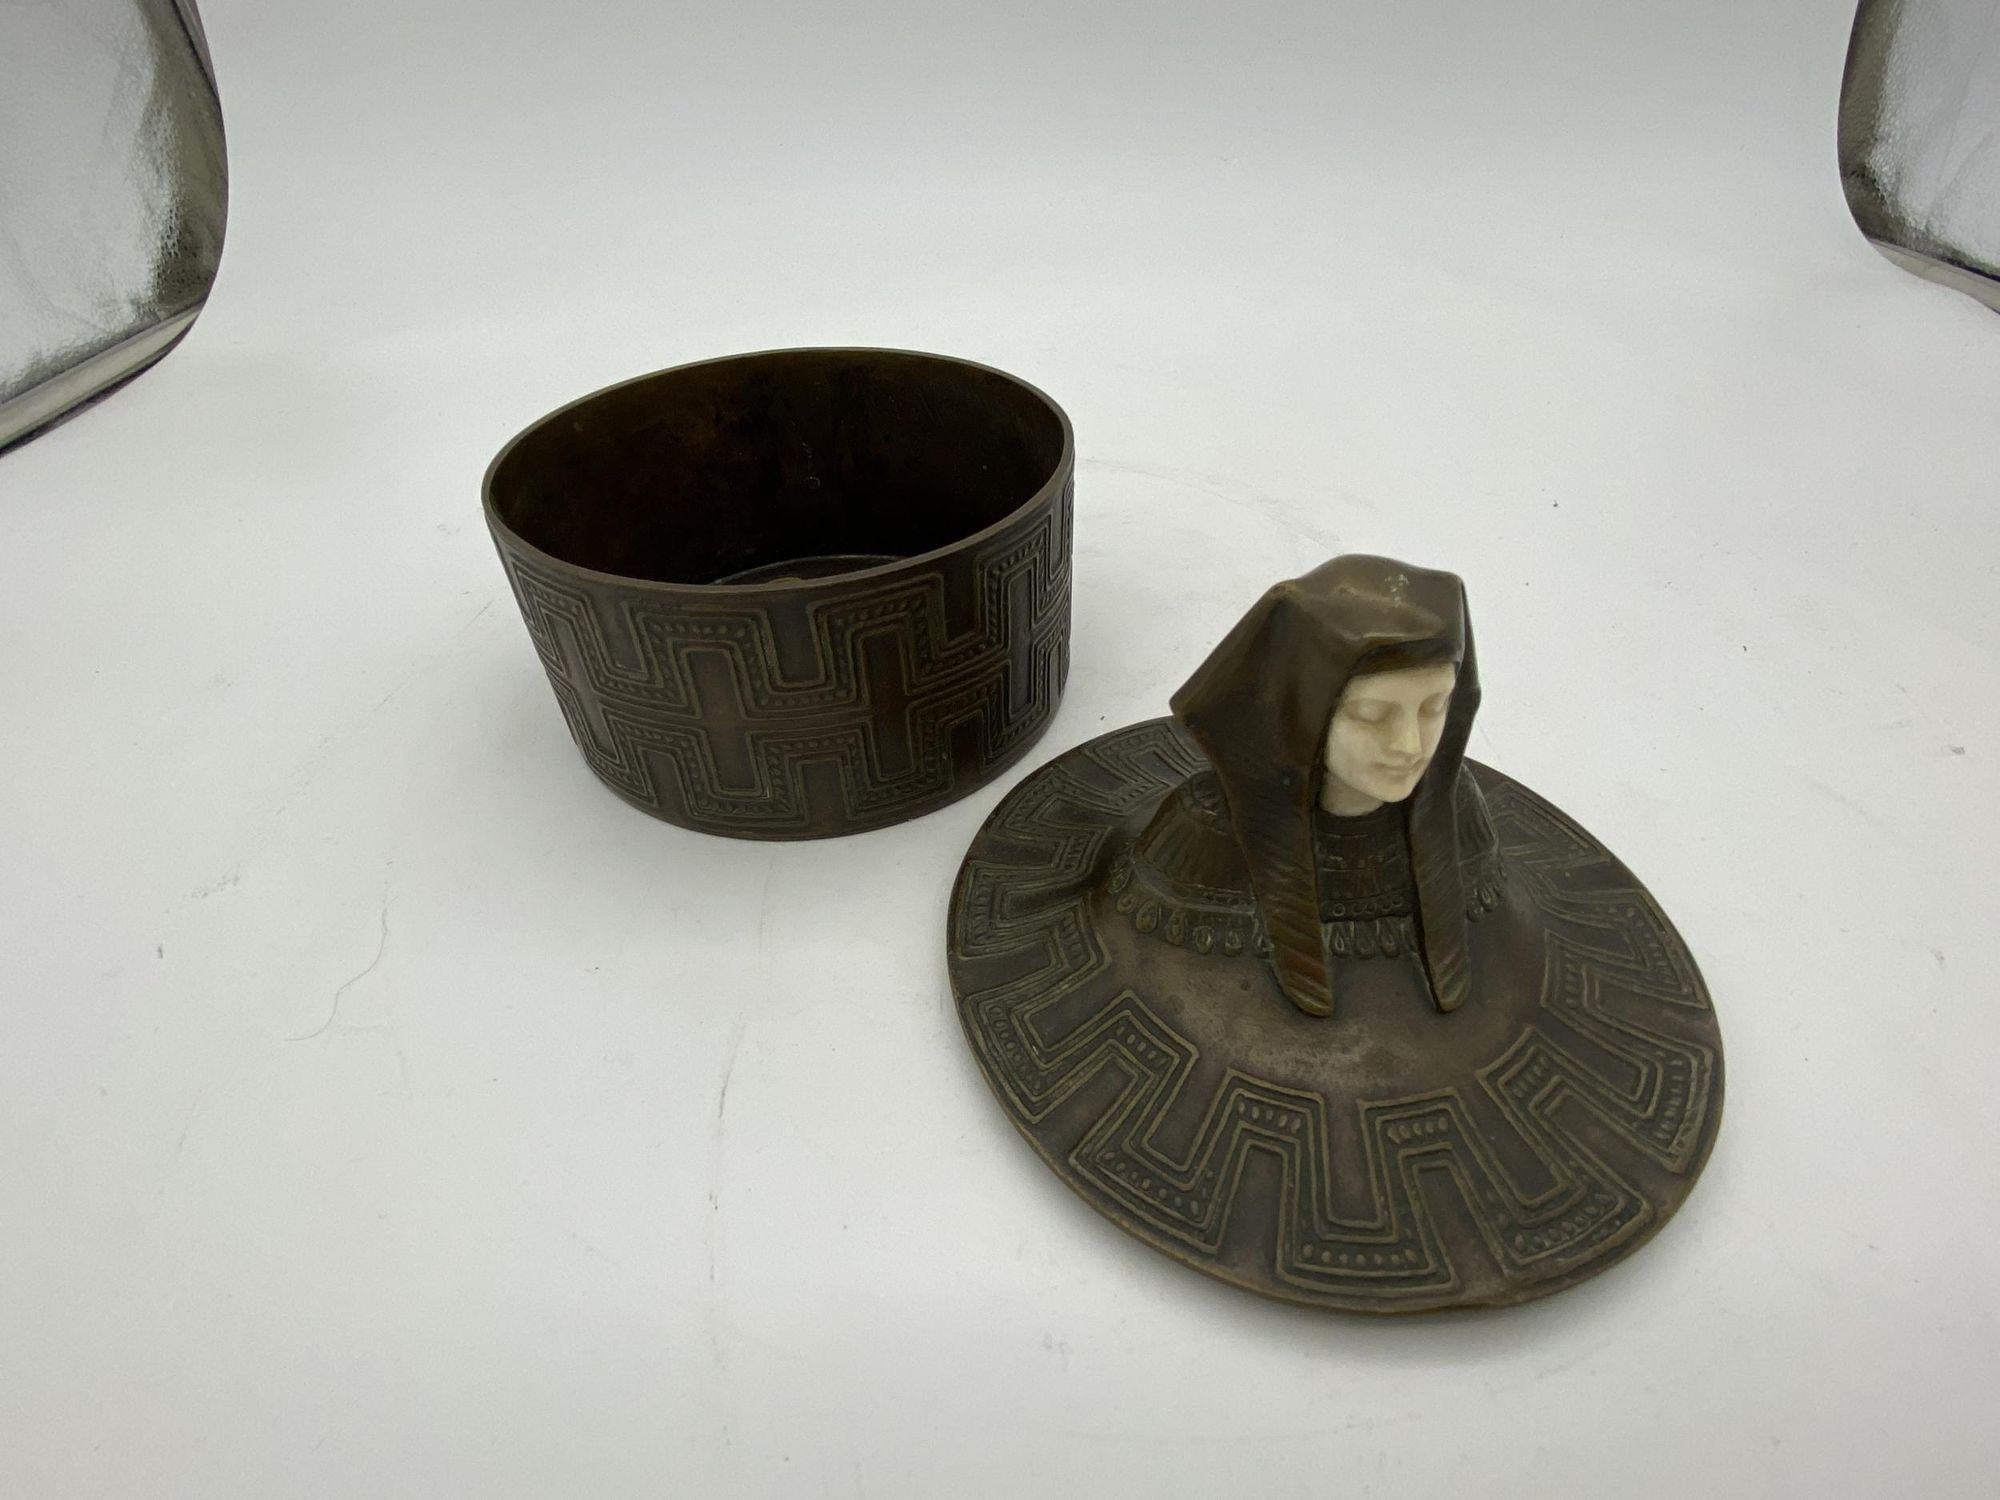 Egyptian Revival Bronze Round Pharaoh Case W/ Carved Bone Face, Circa 1920 For Sale 1